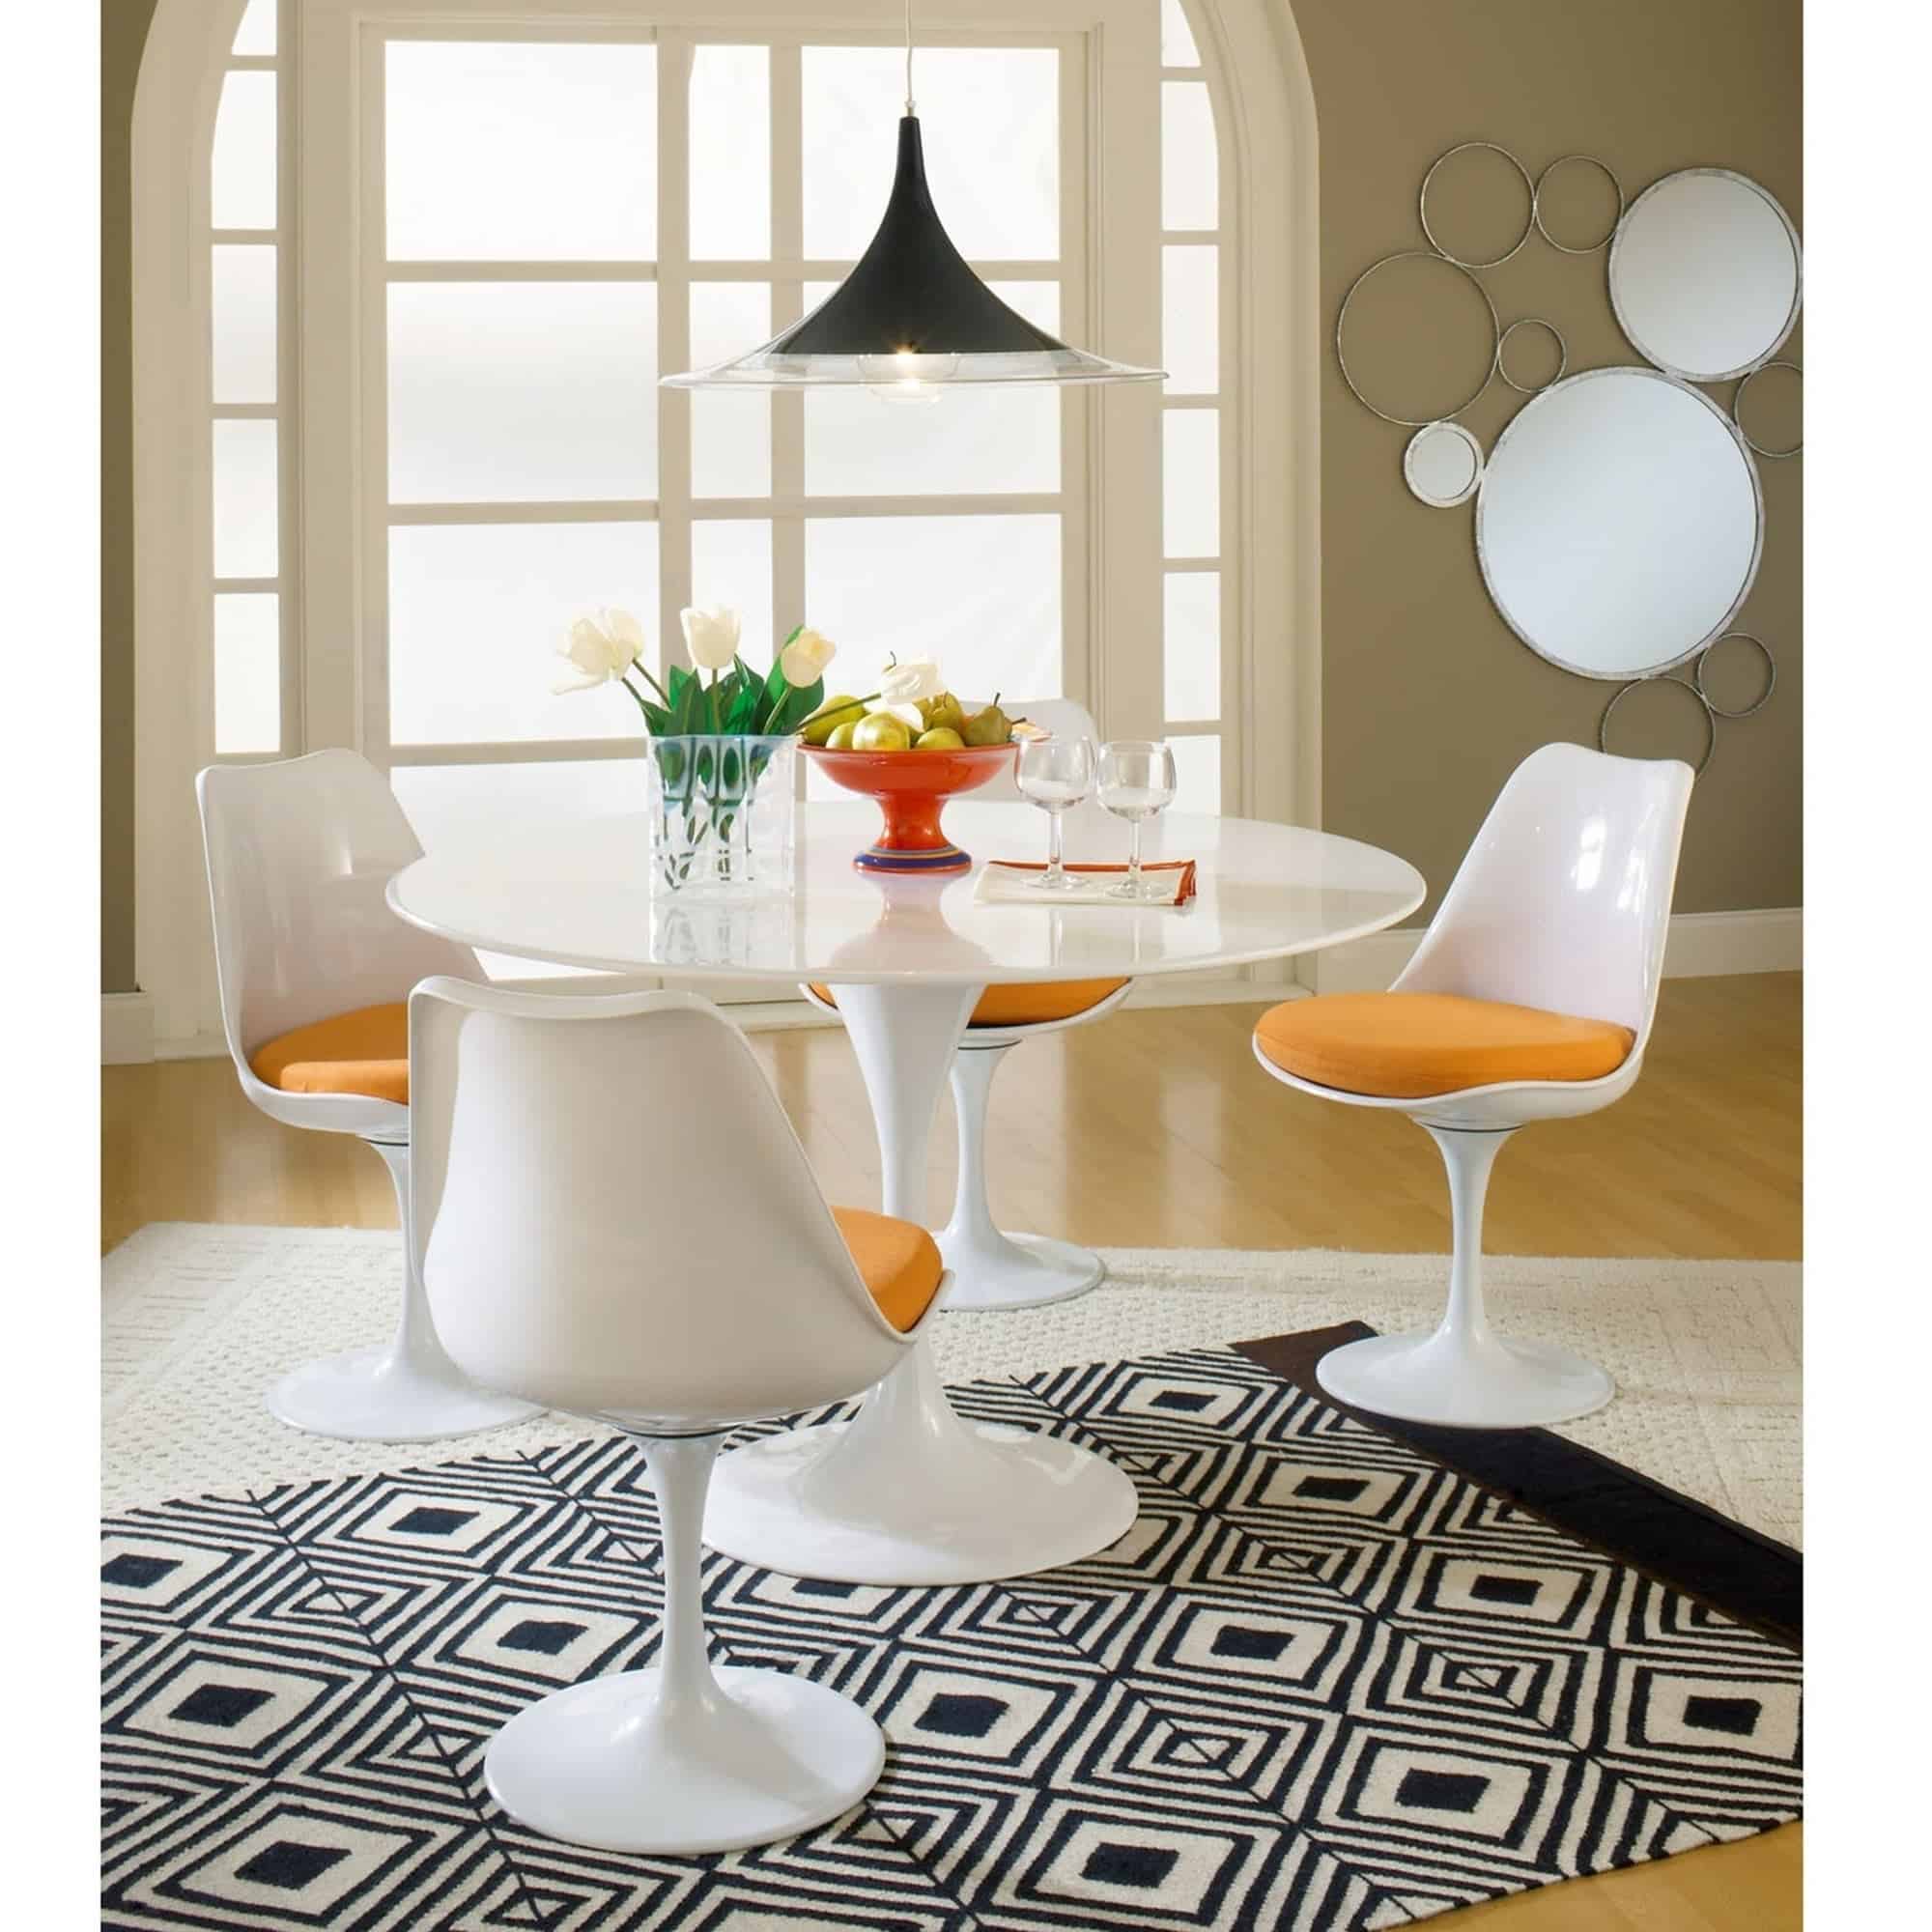 Add a Futuristic Touch With Tulip Chairs